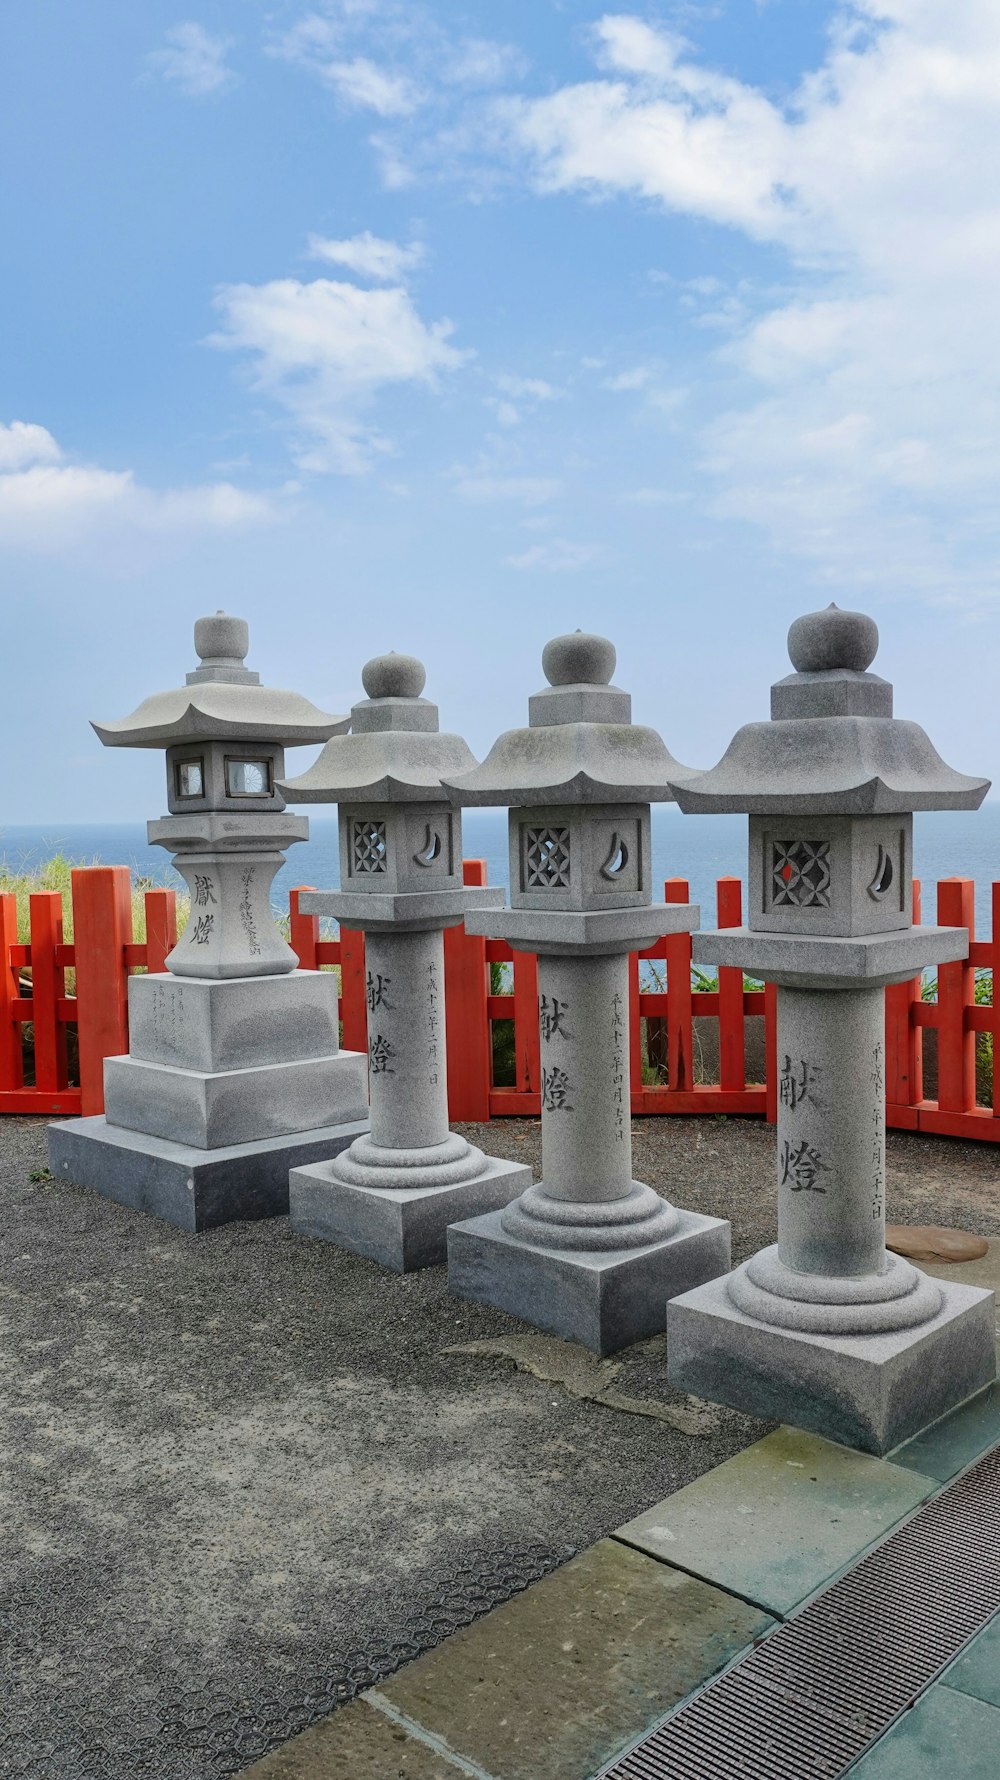 a row of stone lanterns in front of a red fence